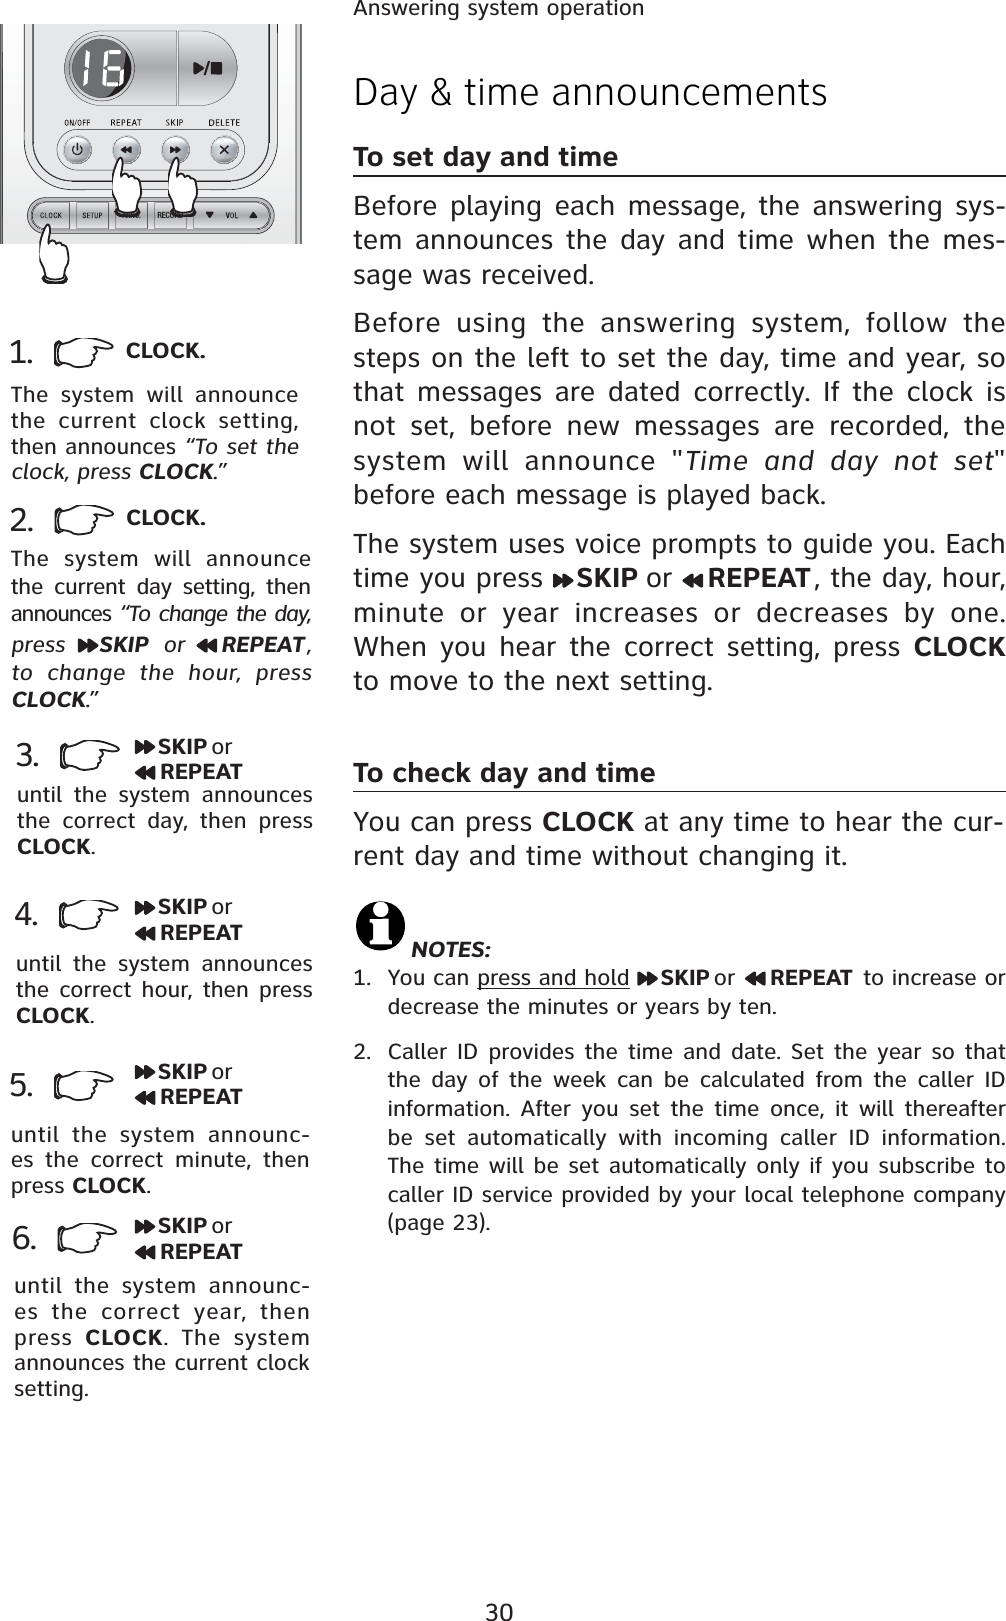 30Answering system operation1.  CLOCK.The system will announce the current clock setting, then announces “To set the clock, press CLOCK.”3. SKIP orREPEATuntil the system announces the correct day, then press CLOCK.2. CLOCK.The system will announce the current day setting, then announces “To change the day, press SKIP  or  REPEAT ,to change the hour, press CLOCK.”4.until the system announces the correct hour, then press CLOCK.until the system announc-es the correct minute, then press CLOCK.5.6.until the system announc-es the correct year, then press  CLOCK. The system announces the current clock setting.SKIP orREPEATSKIP orREPEATSKIP orREPEATDay &amp; time announcementsTo set day and timeBefore playing each message, the answering sys-tem announces the day and time when the mes-sage was received. Before using the answering system, follow the steps on the left to set the day, time and year, so that messages are dated correctly. If the clock is not set, before new messages are recorded, the system will announce &quot;Time and day not set&quot;before each message is played back.The system uses voice prompts to guide you. Each time you press  SKIP or REPEAT, the day, hour, minute or year increases or decreases by one.  When you hear the correct setting, press CLOCKto move to the next setting.To check day and timeYou can press CLOCK at any time to hear the cur-rent day and time without changing it.NOTES:1. You can press and hold SKIP or REPEAT to increase or decrease the minutes or years by ten.2. Caller ID provides the time and date. Set the year so that the day of the week can be calculated from the caller ID information. After you set the time once, it will thereafter be set automatically with incoming caller ID information. The time will be set automatically only if you subscribe to caller ID service provided by your local telephone company (page 23).RECORDANNC.